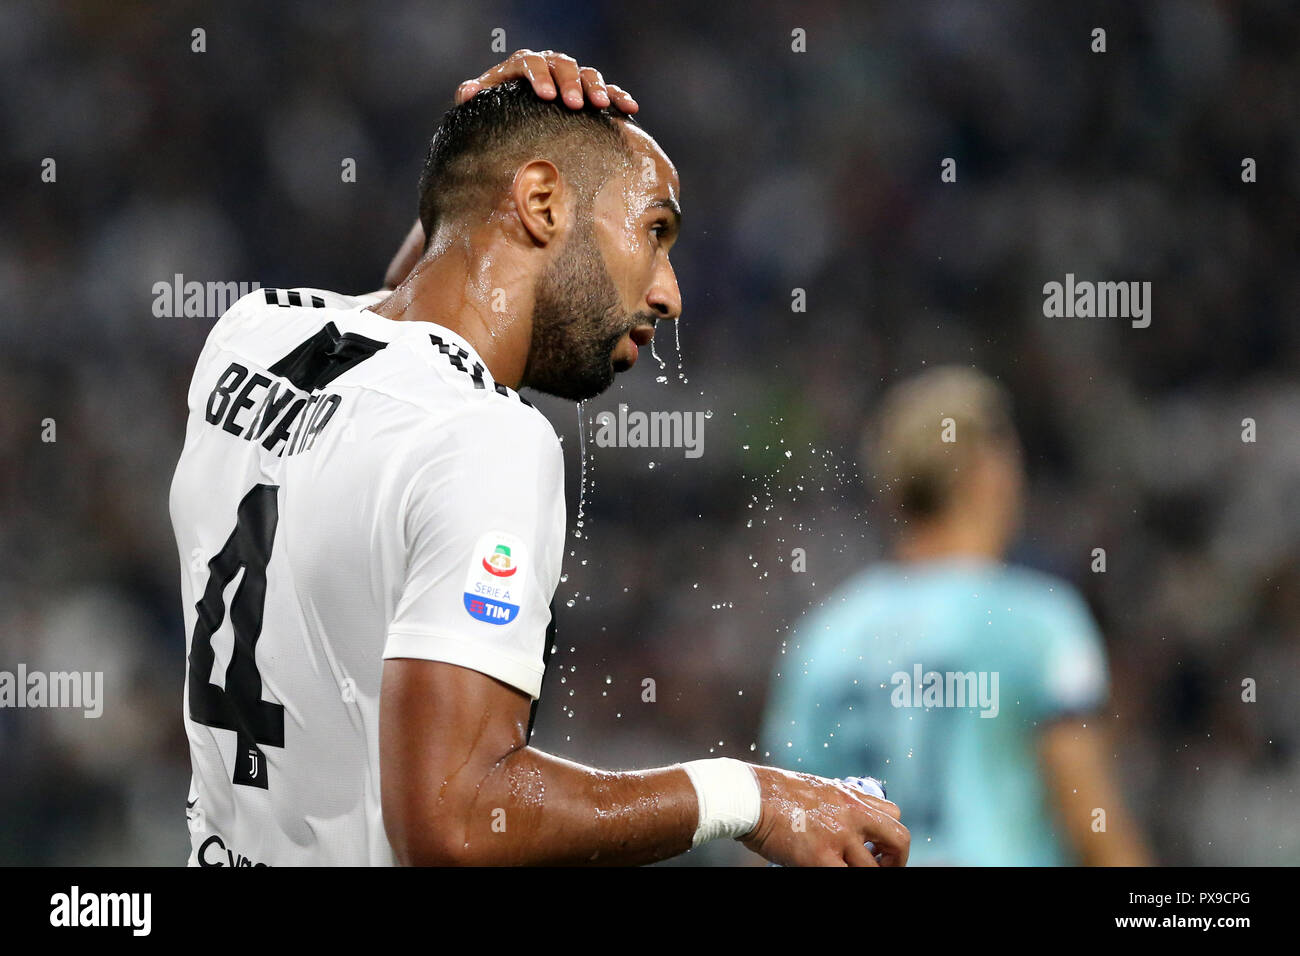 Torino, Italy. 20th October 2018. Medhi Benatia of Juventus FC   during the Serie A football match between Juventus Fc and Genoa Cfc. Credit: Marco Canoniero/Alamy Live News Stock Photo